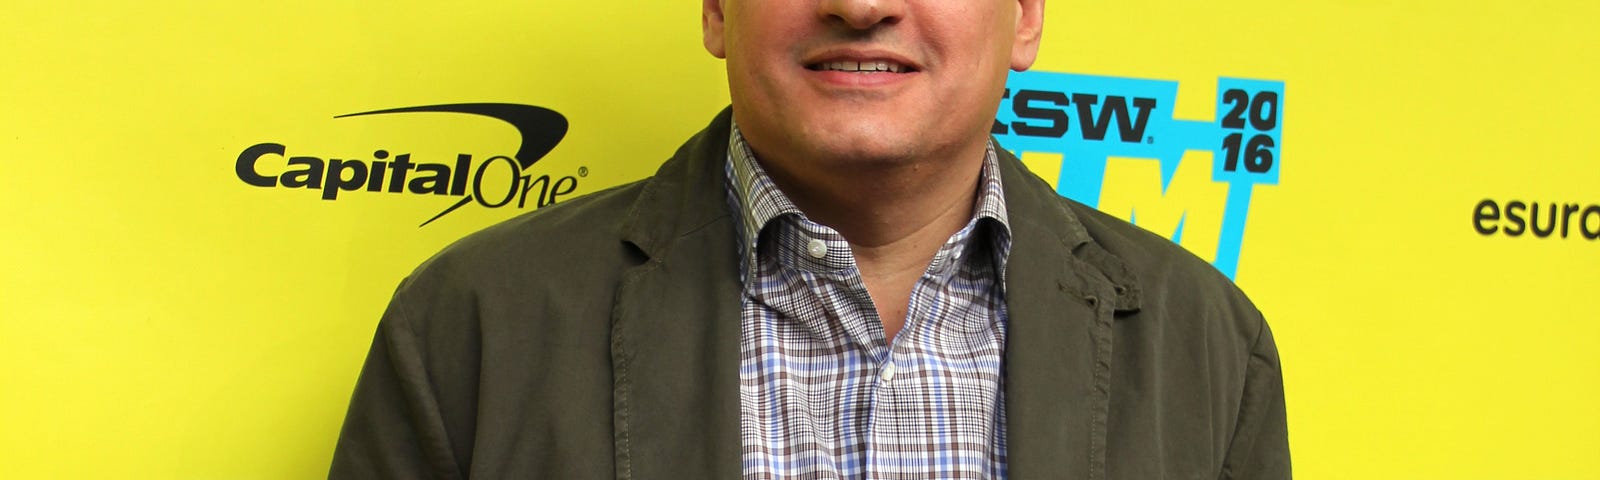 Ted Sarandos standing in front of a primarily yellow step and repeat at SXSW in 2016, he is wearing a brown/greenish jacket, a plaid shirt and blue jeans.